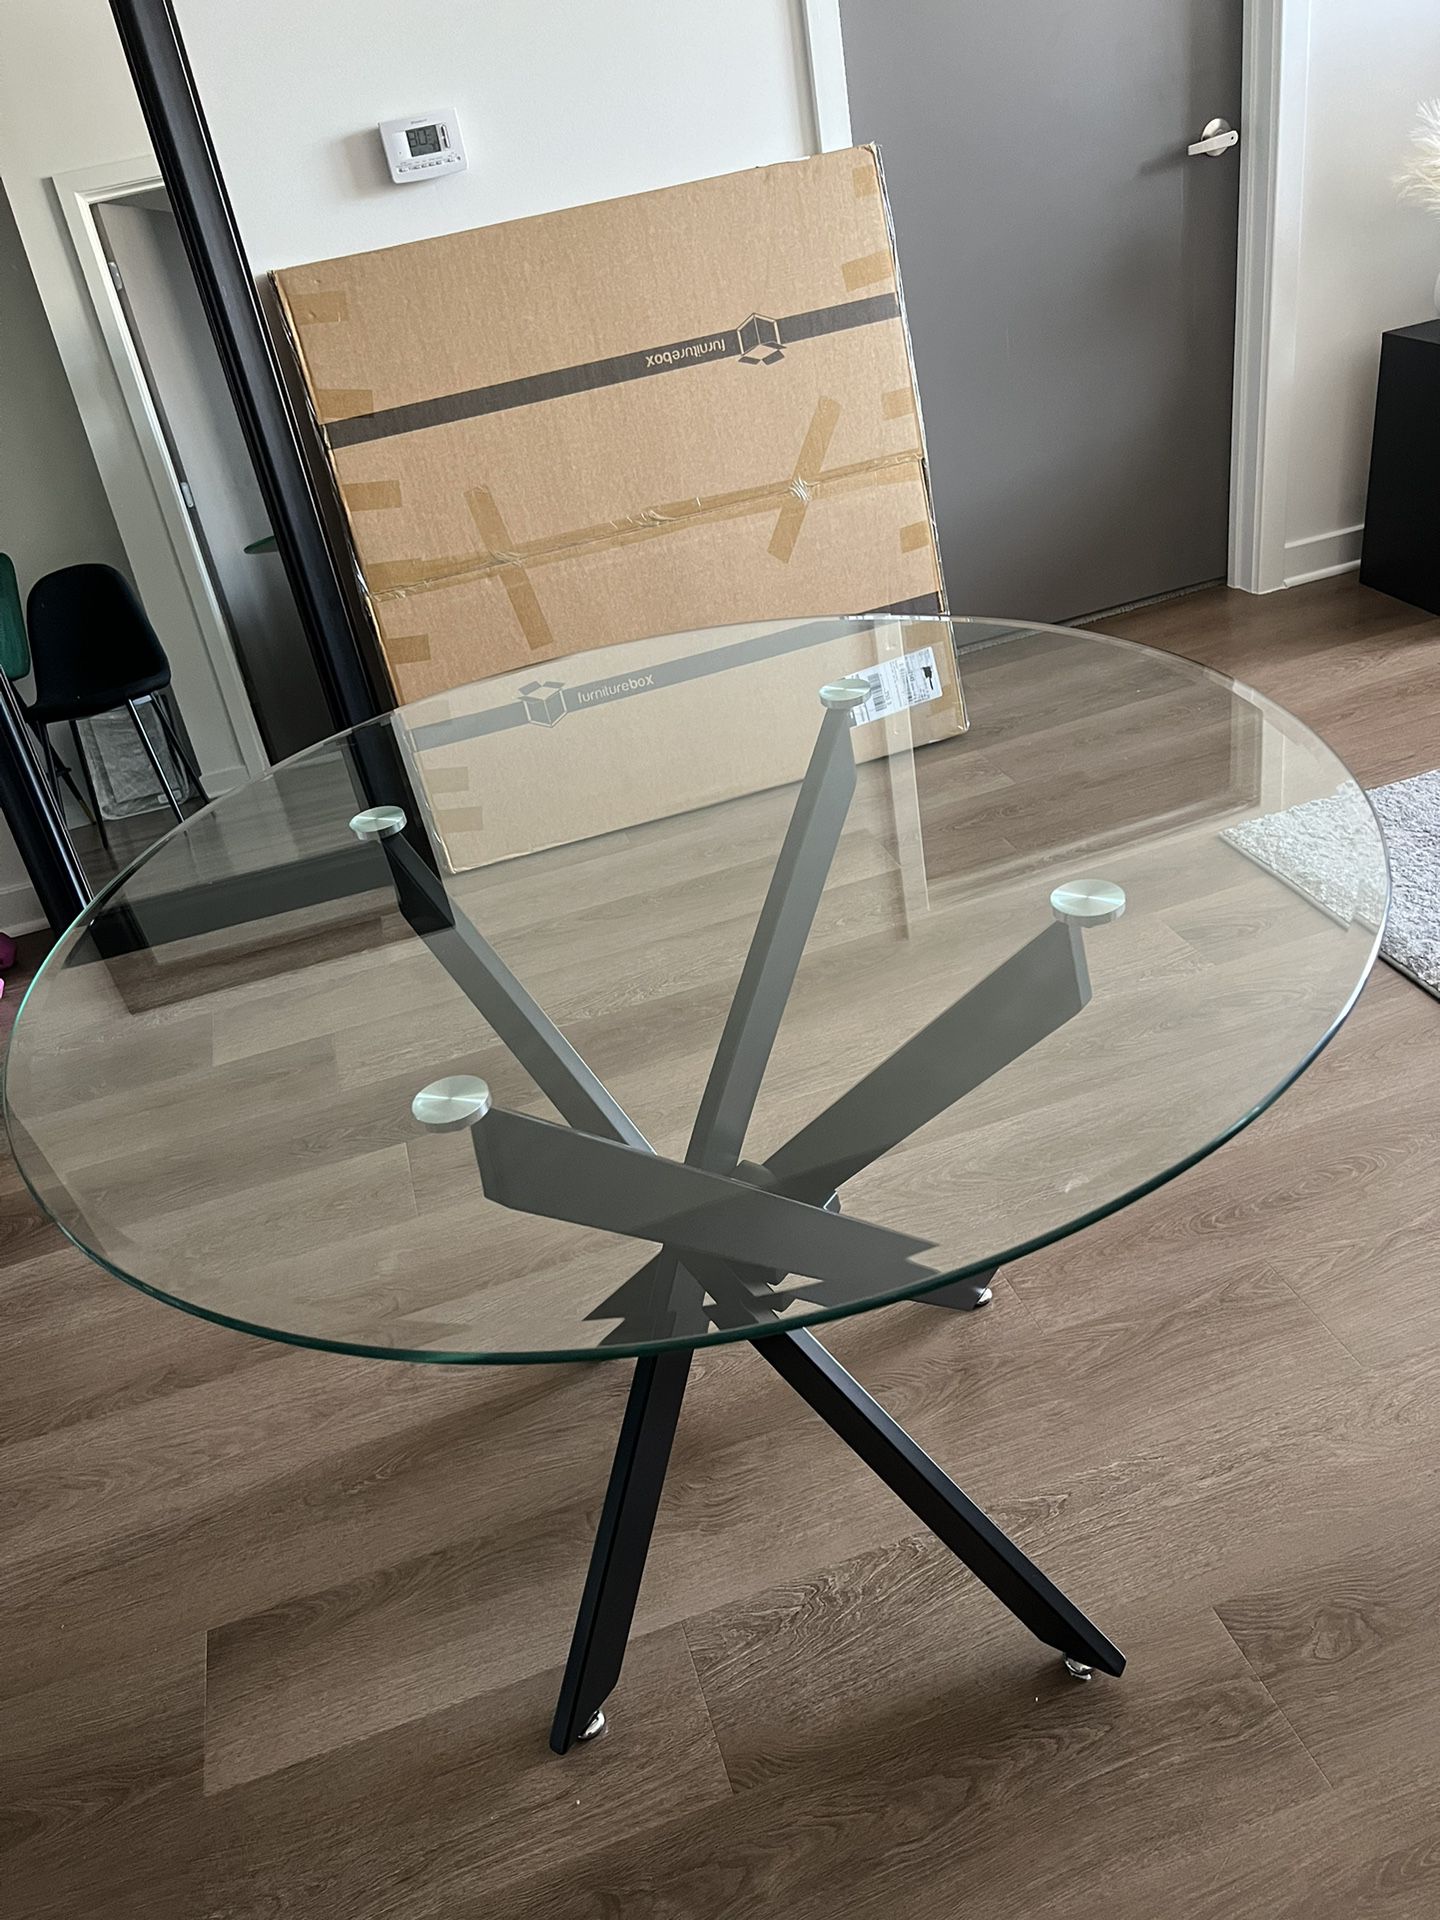 Glass Round Table Top (TOP ONLY) - 40 inches